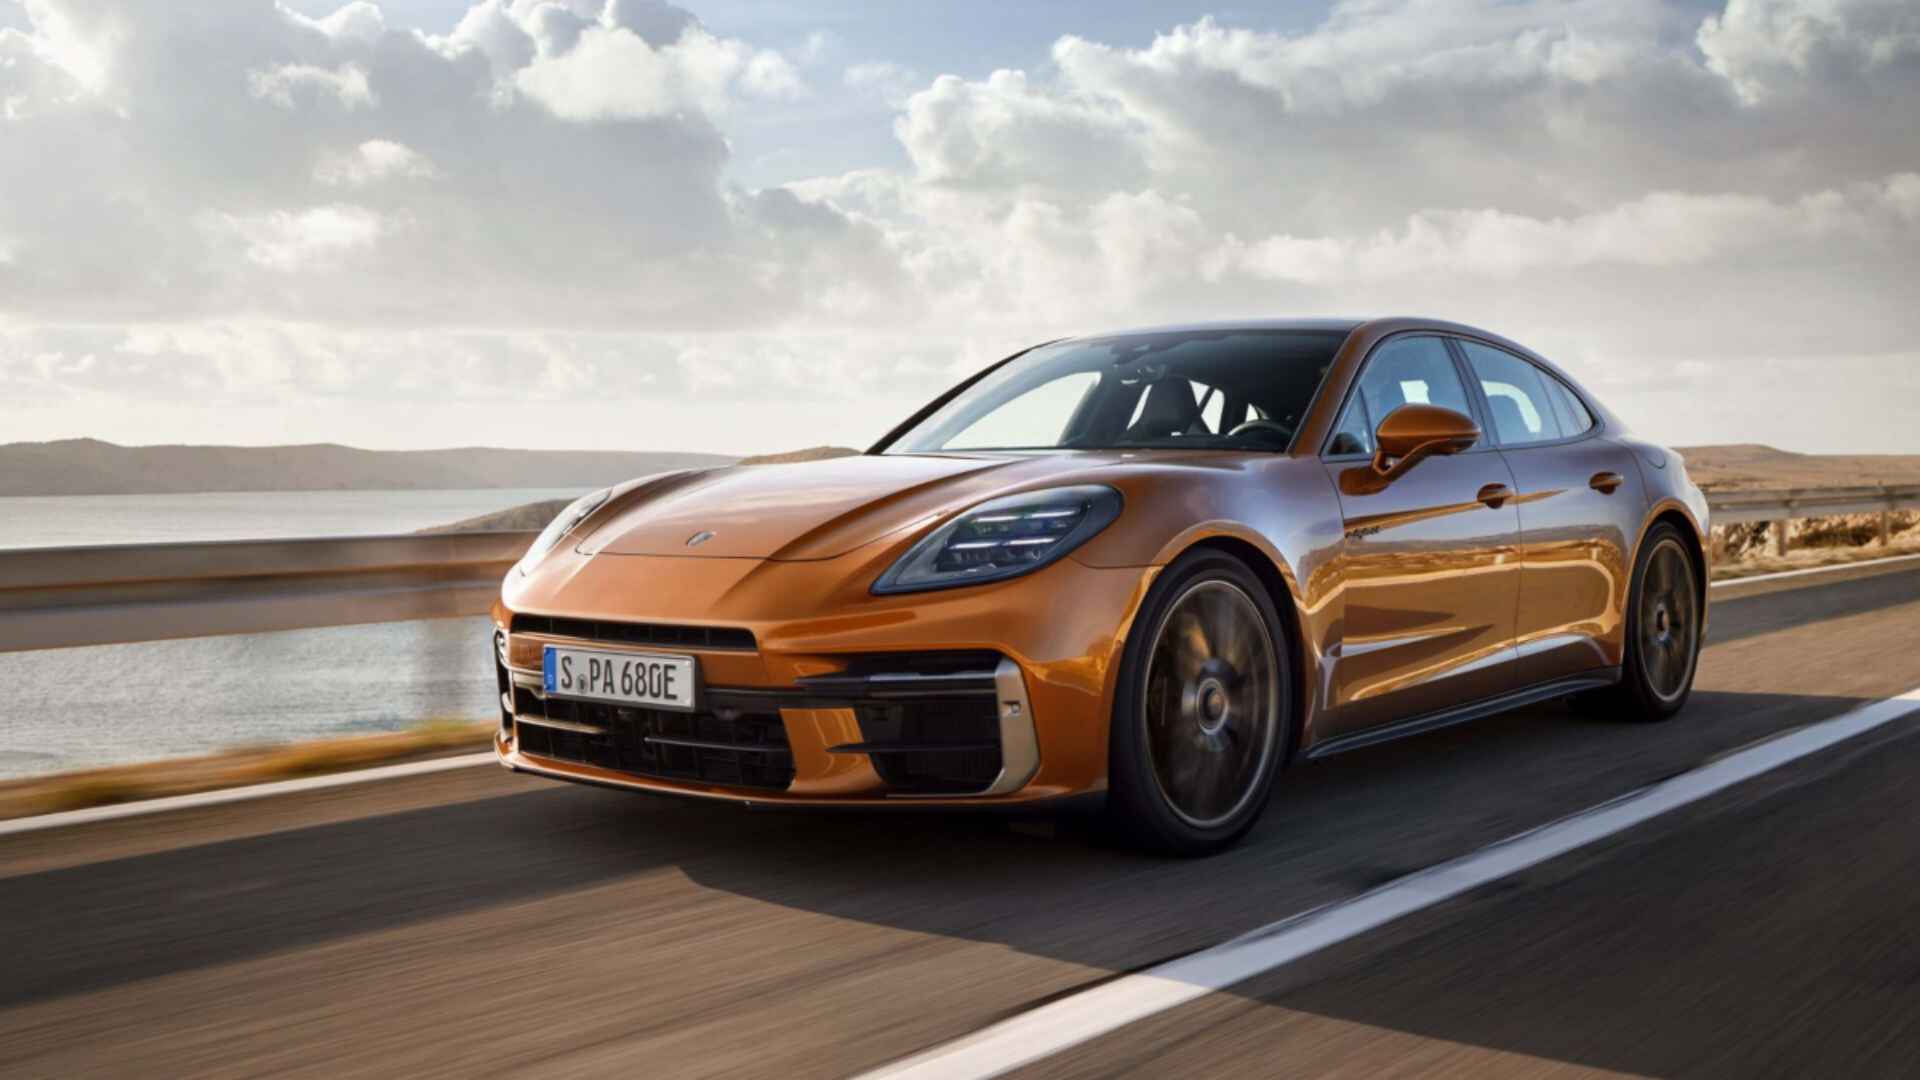 Porche's Third-Generation Panamera is priced starting from Rs 1.69 crore